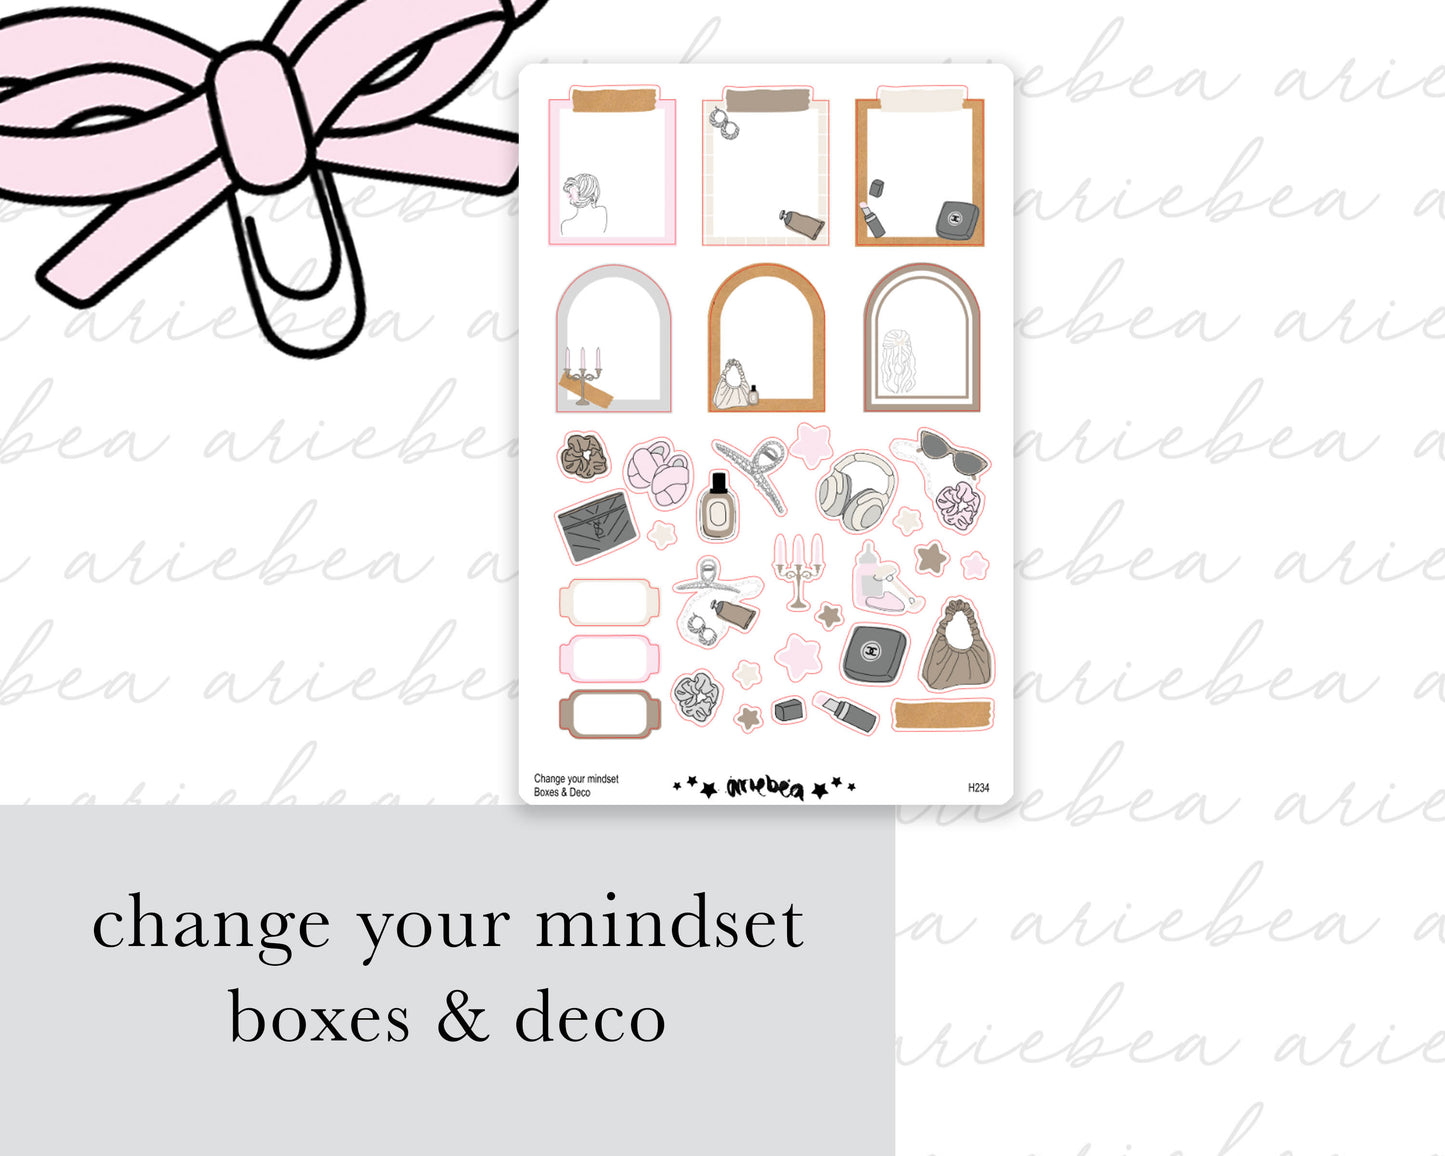 Change Your Mindset Collection Boxes & Deco